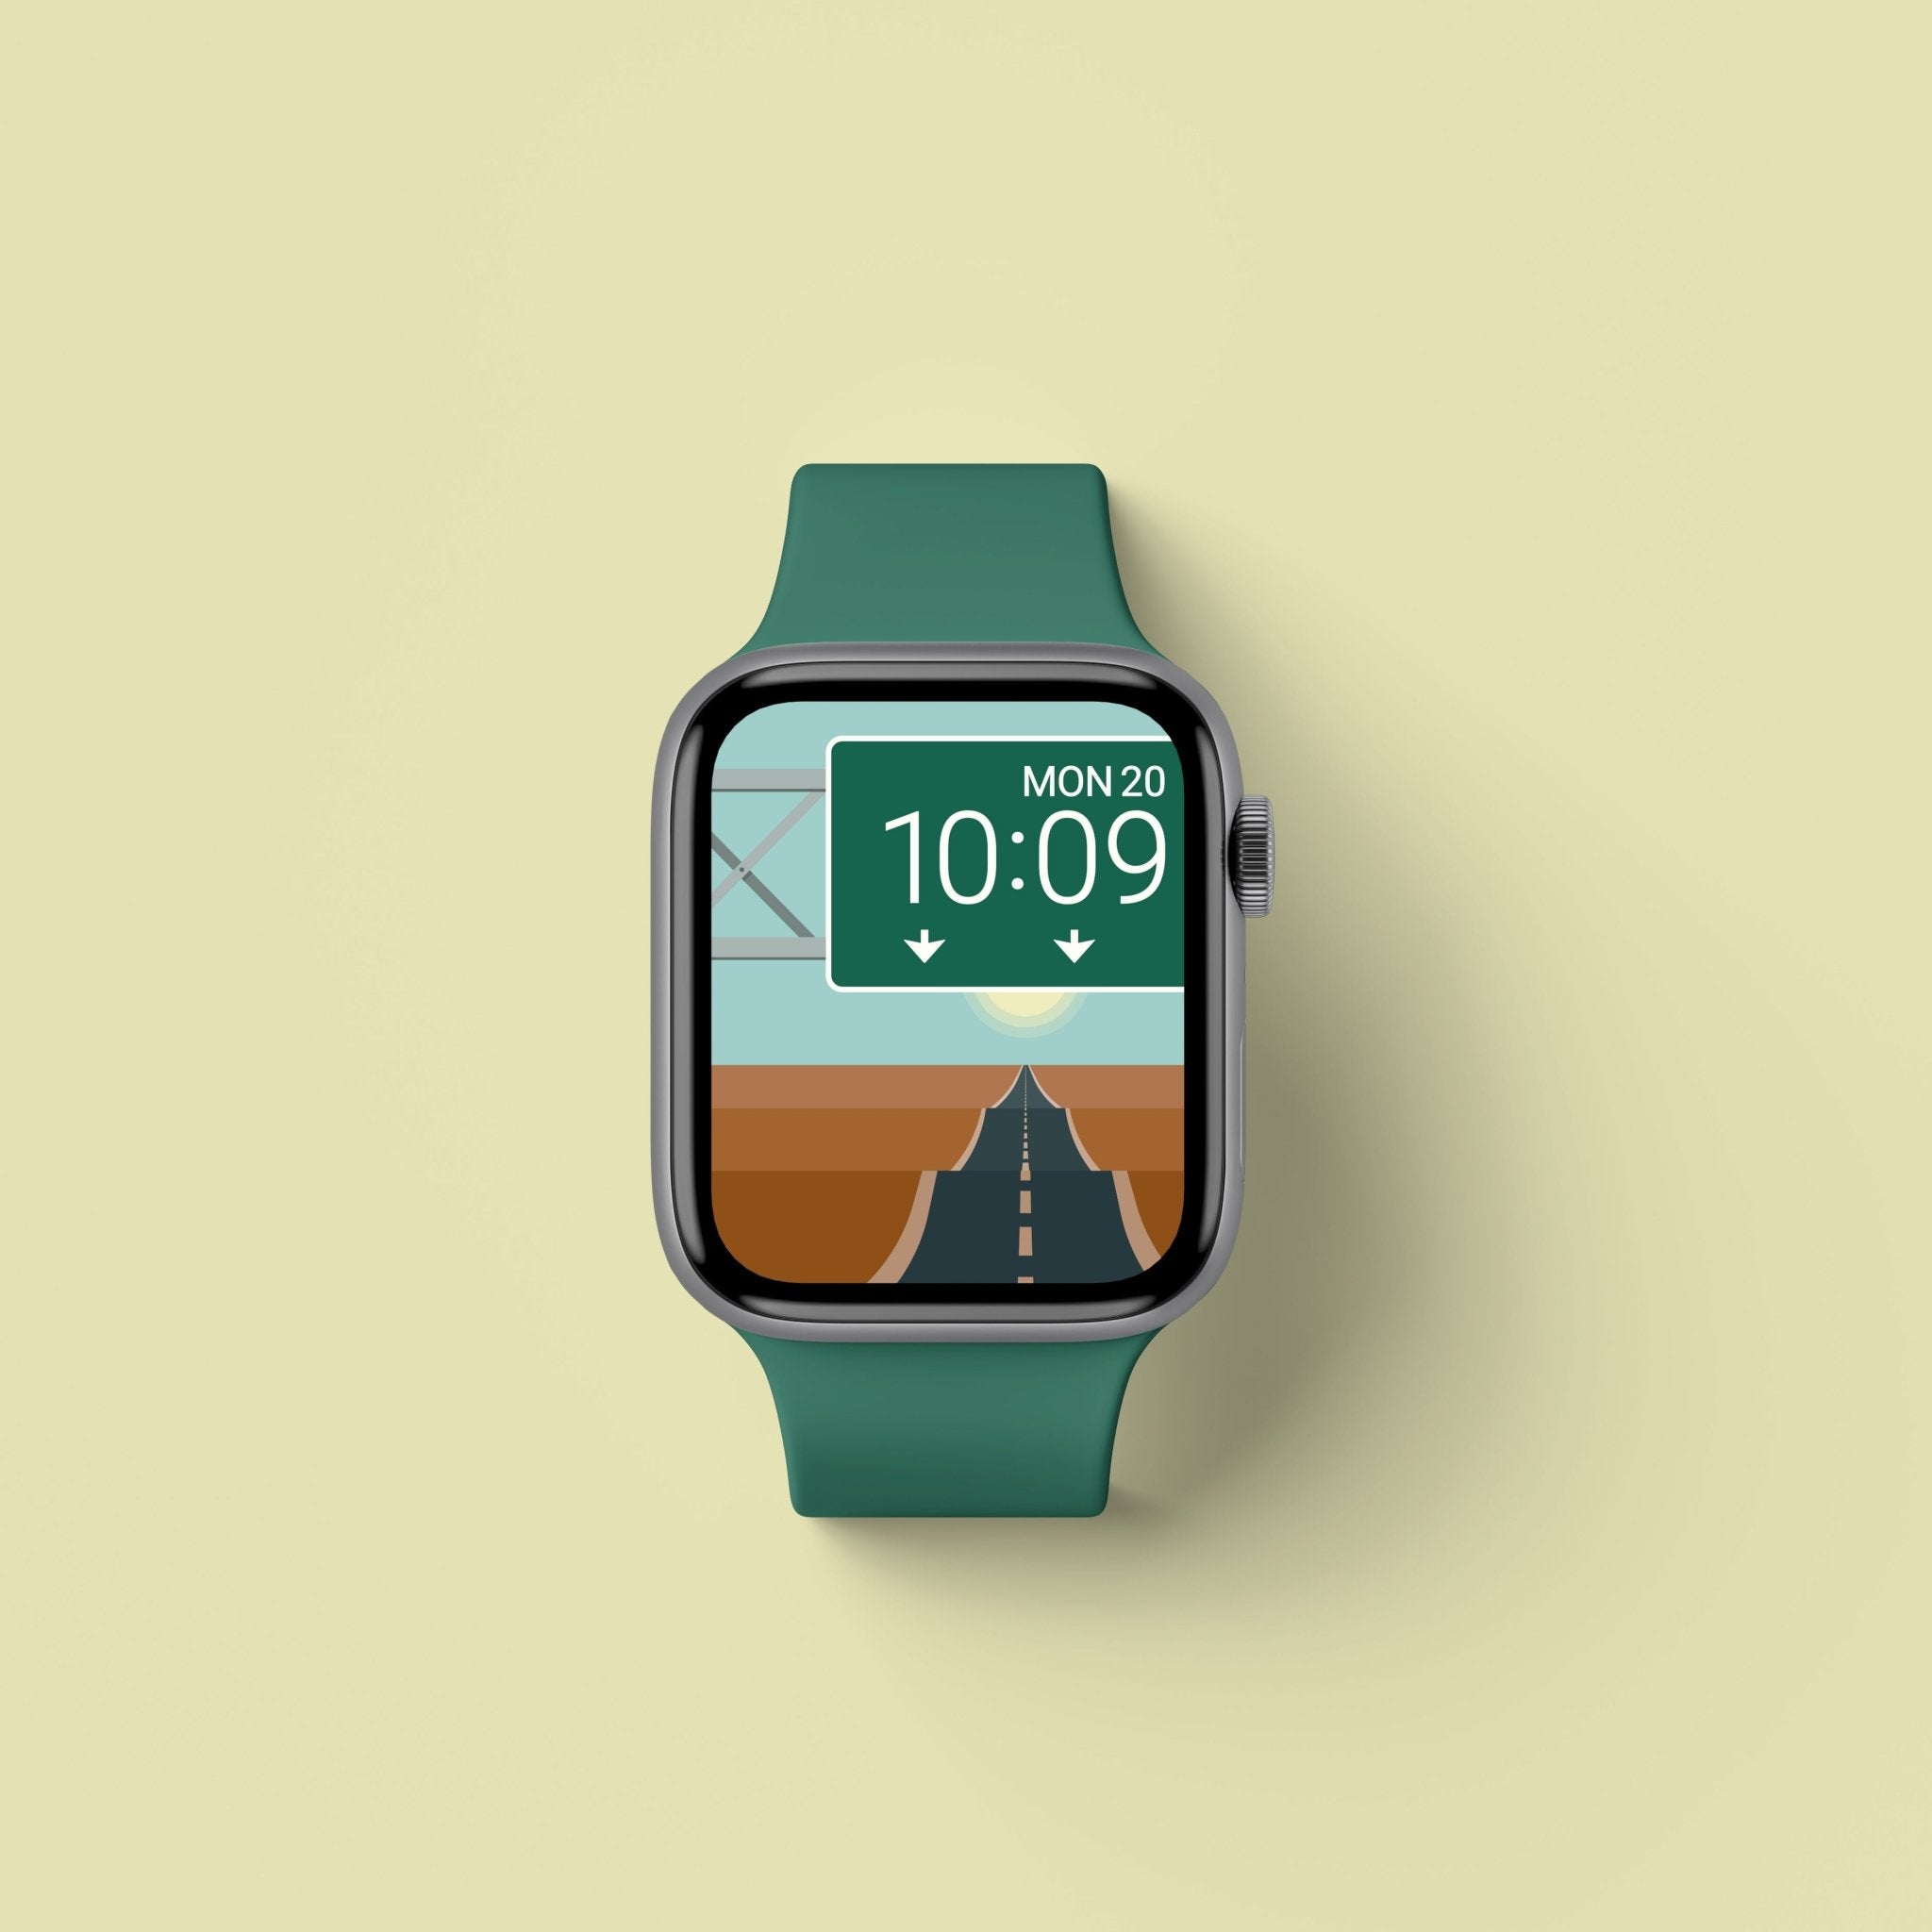 Scenes and Landscapes | Apple Watch Wallpapers - 4 Pack - Buckle & Band - Landscapes